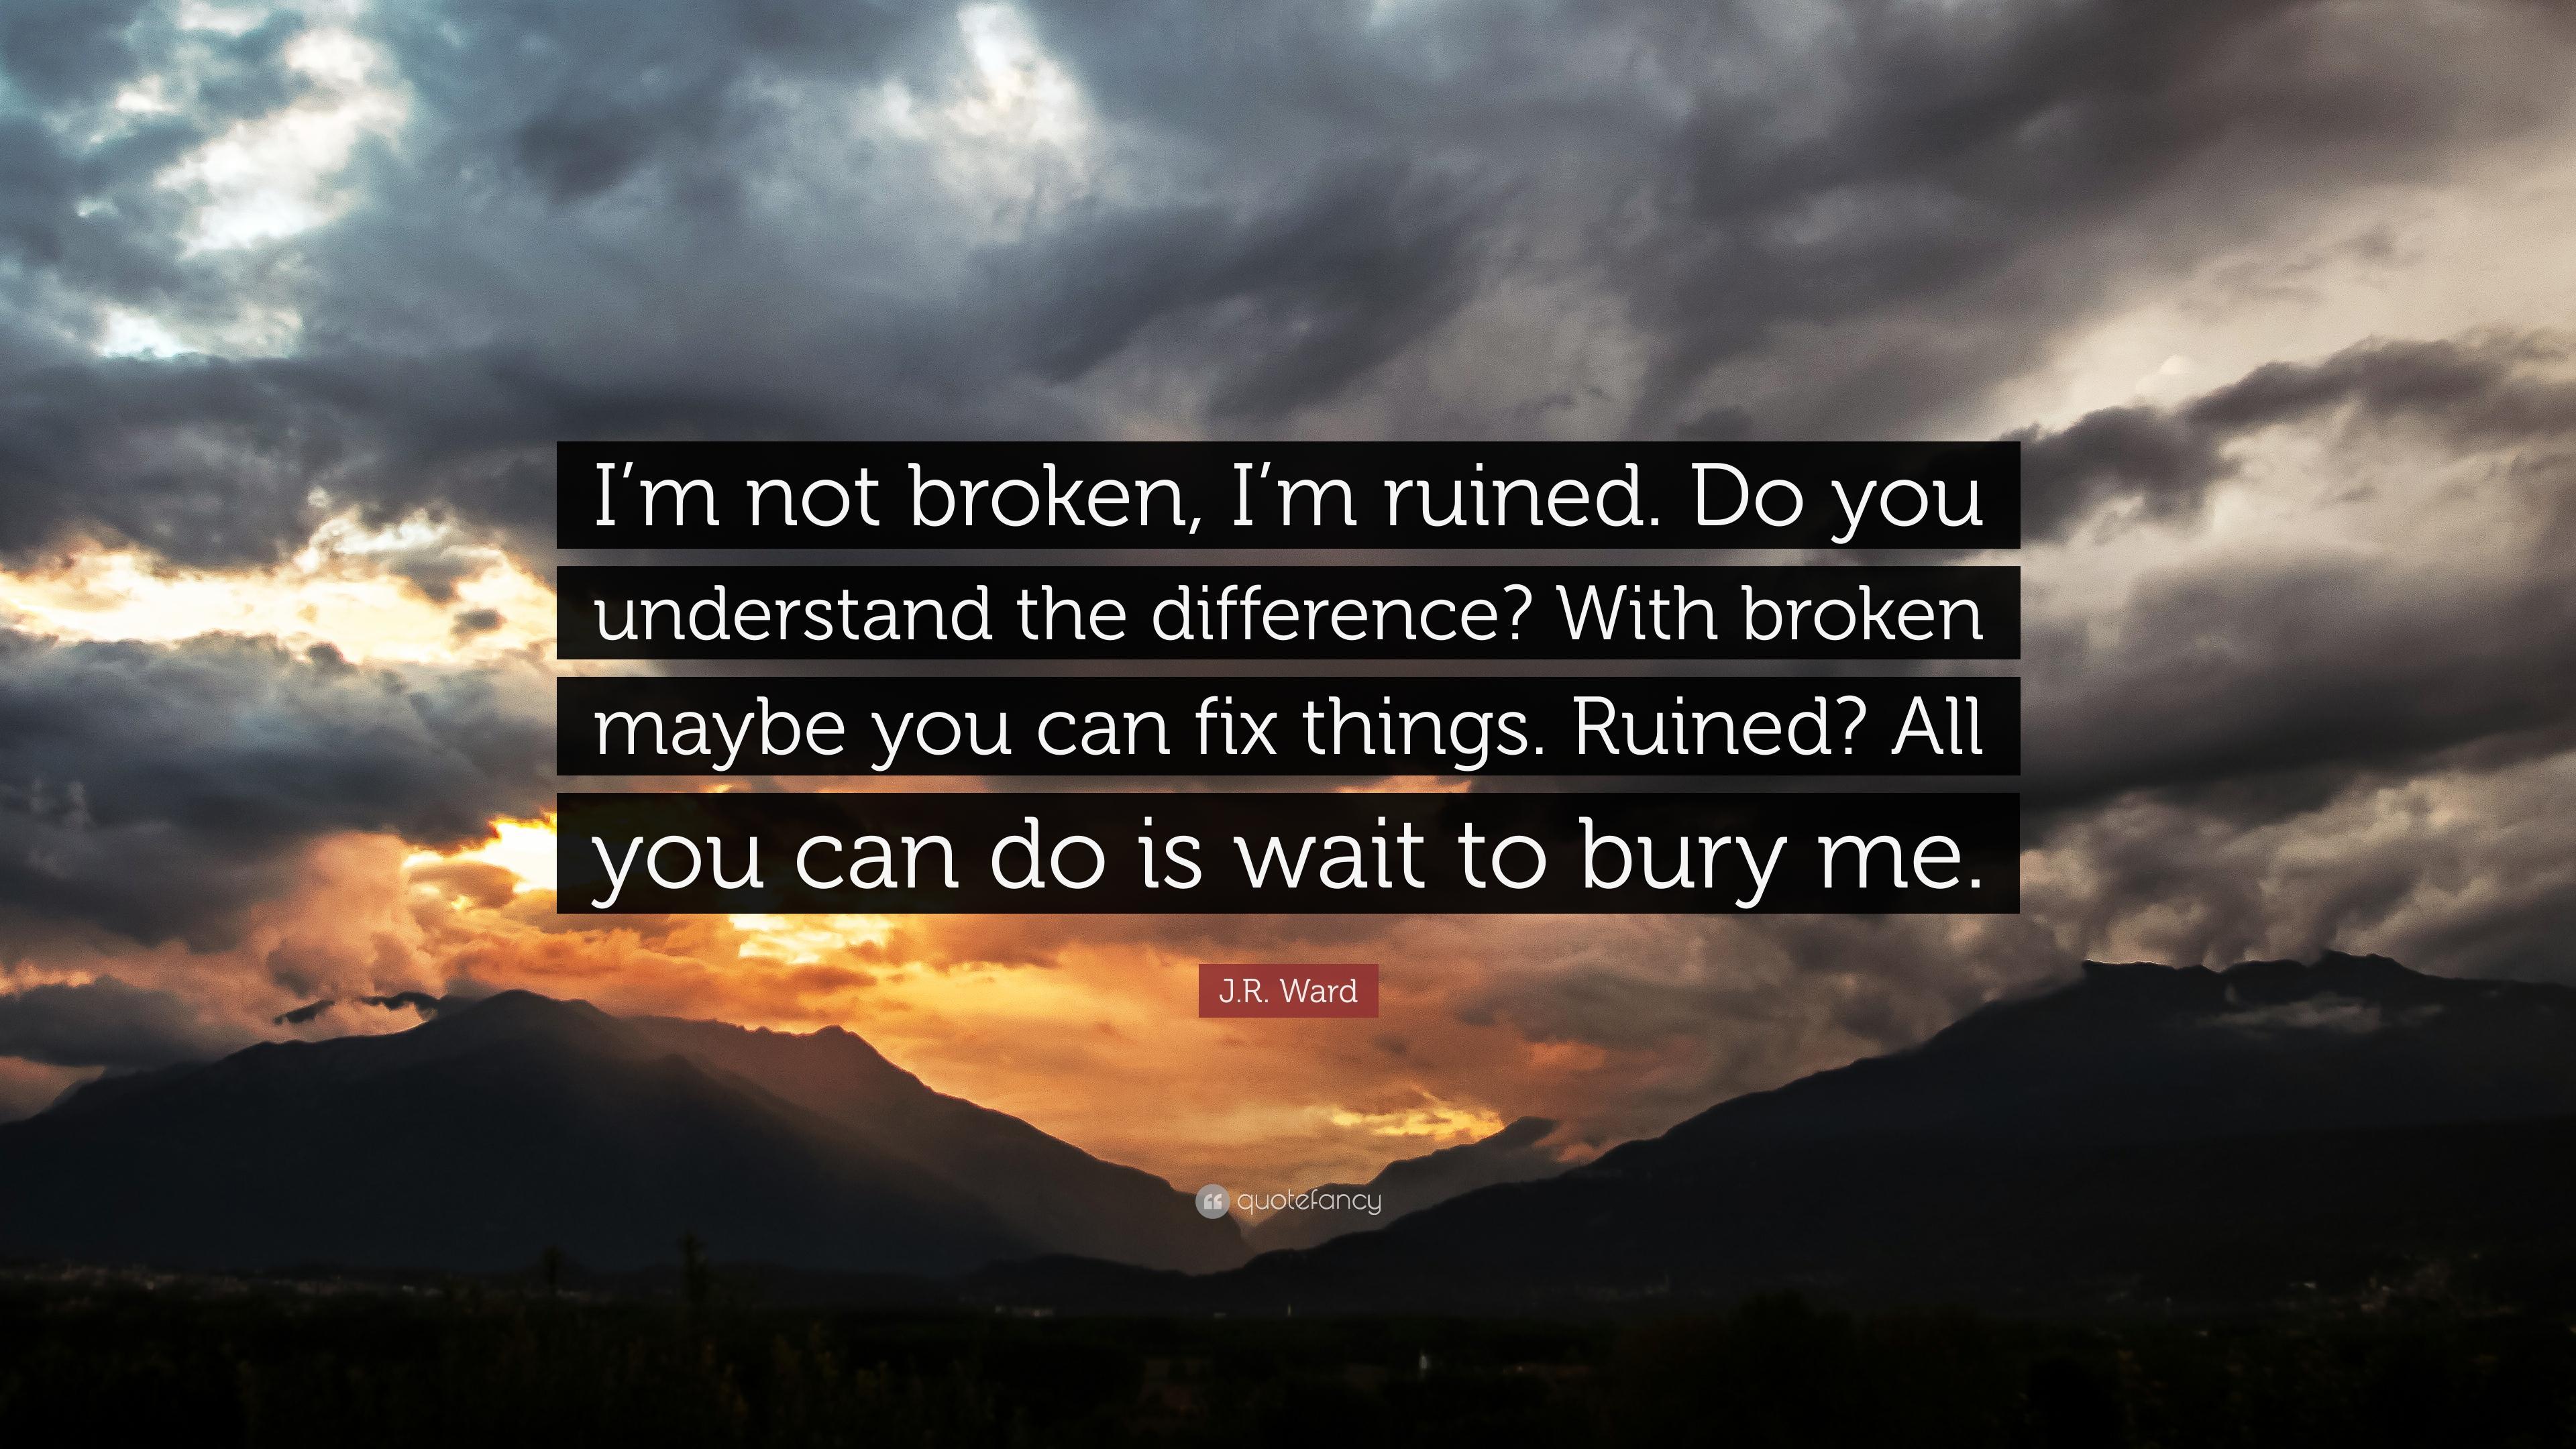 J.R. Ward Quote: “I'm not broken, I'm ruined. Do you understand